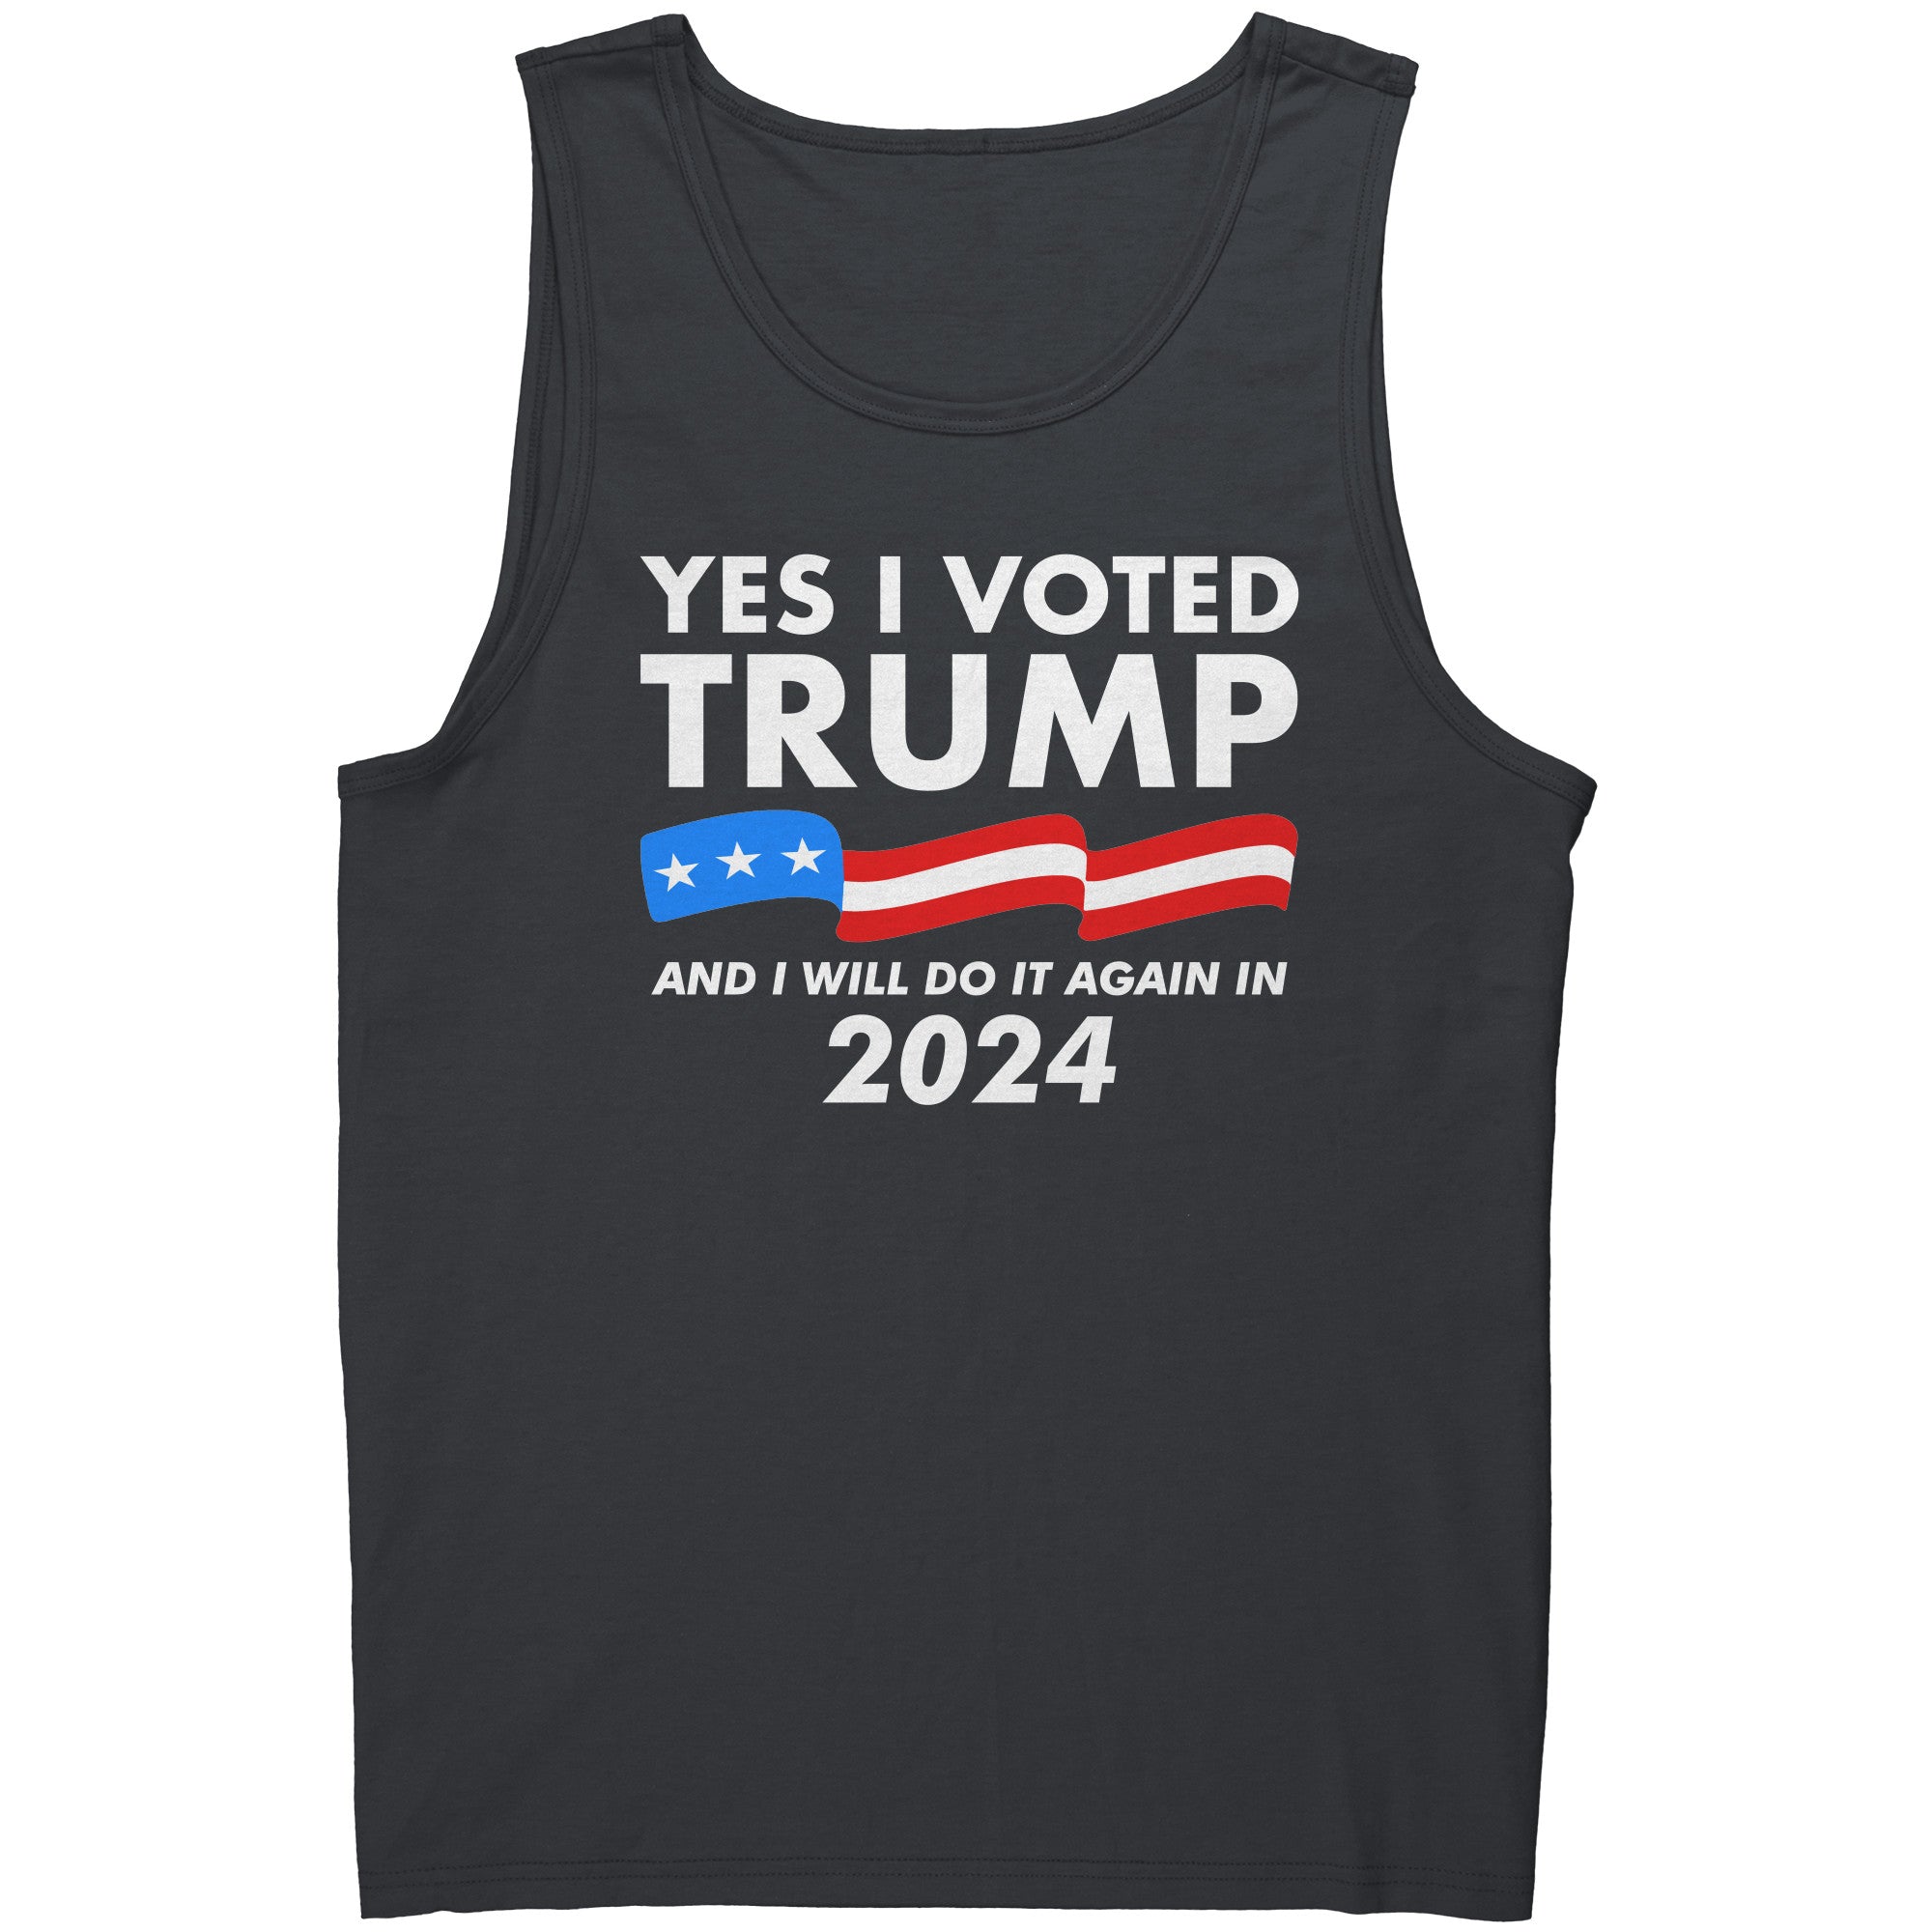 Yes I Voted Trump And I Will Do It Again In 2024 -Apparel | Drunk America 